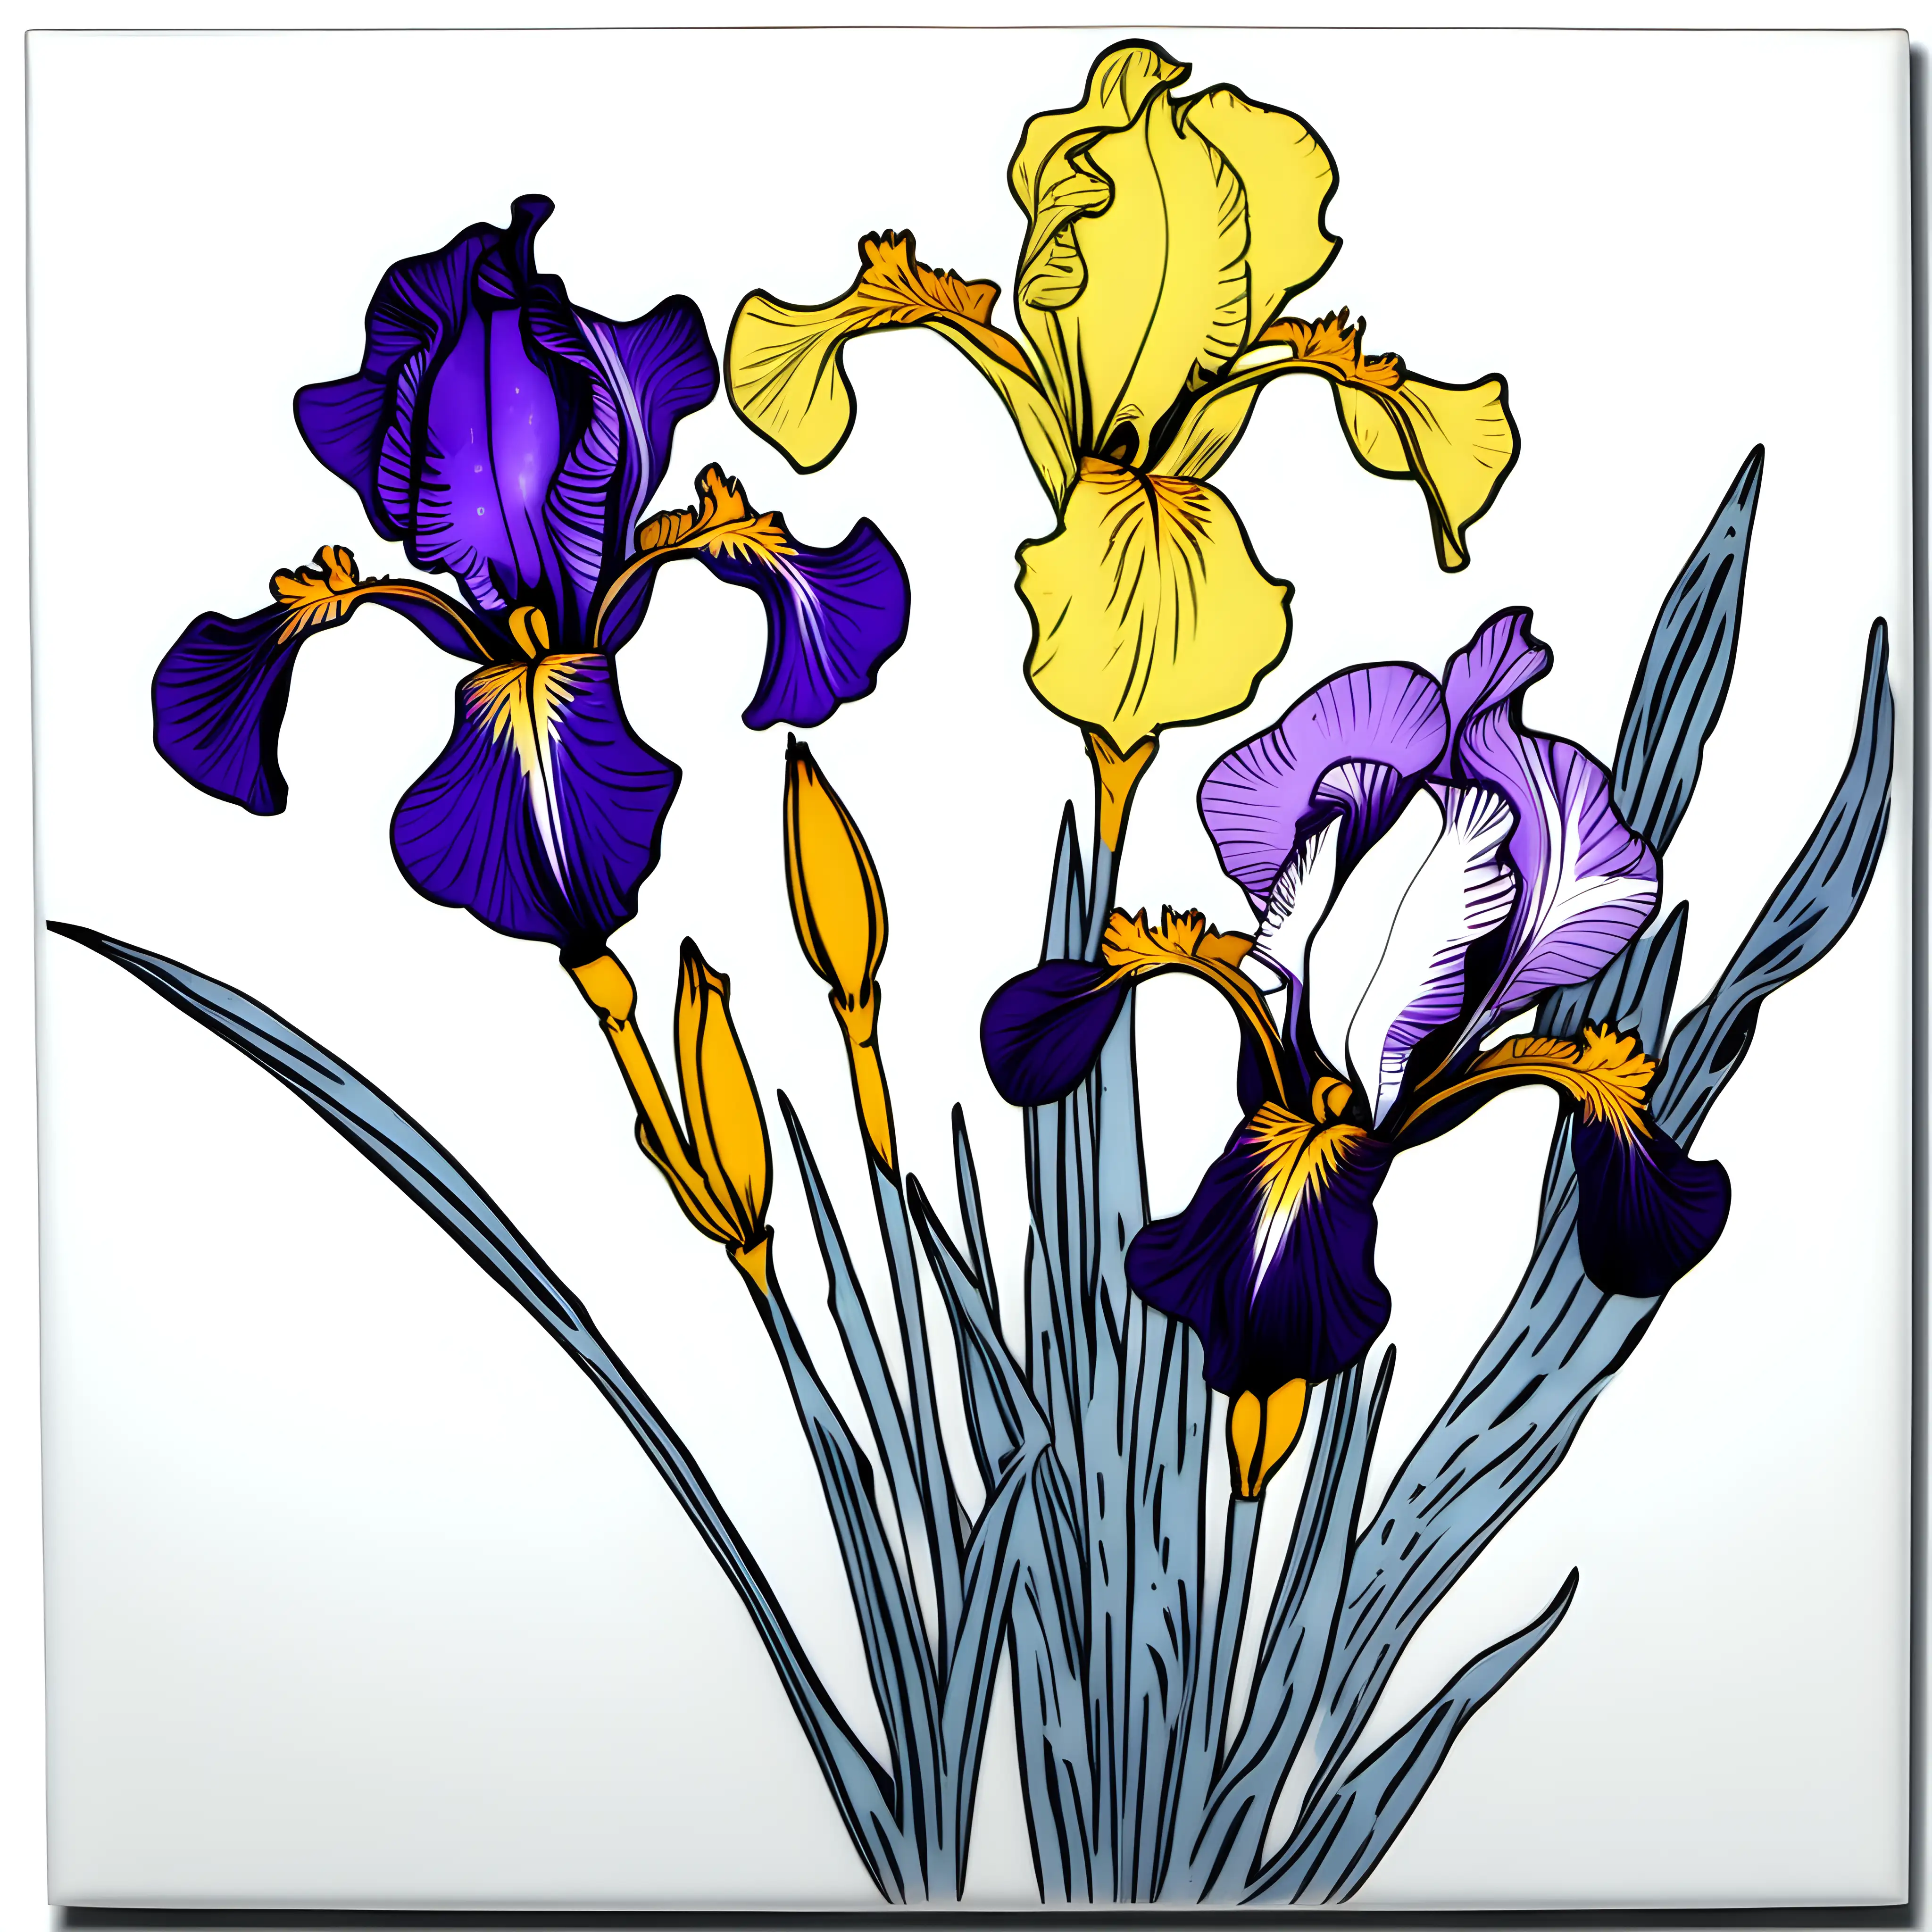 Pastel Japanese Iris Watercolor Art with Andy Warhol Inspired Elements